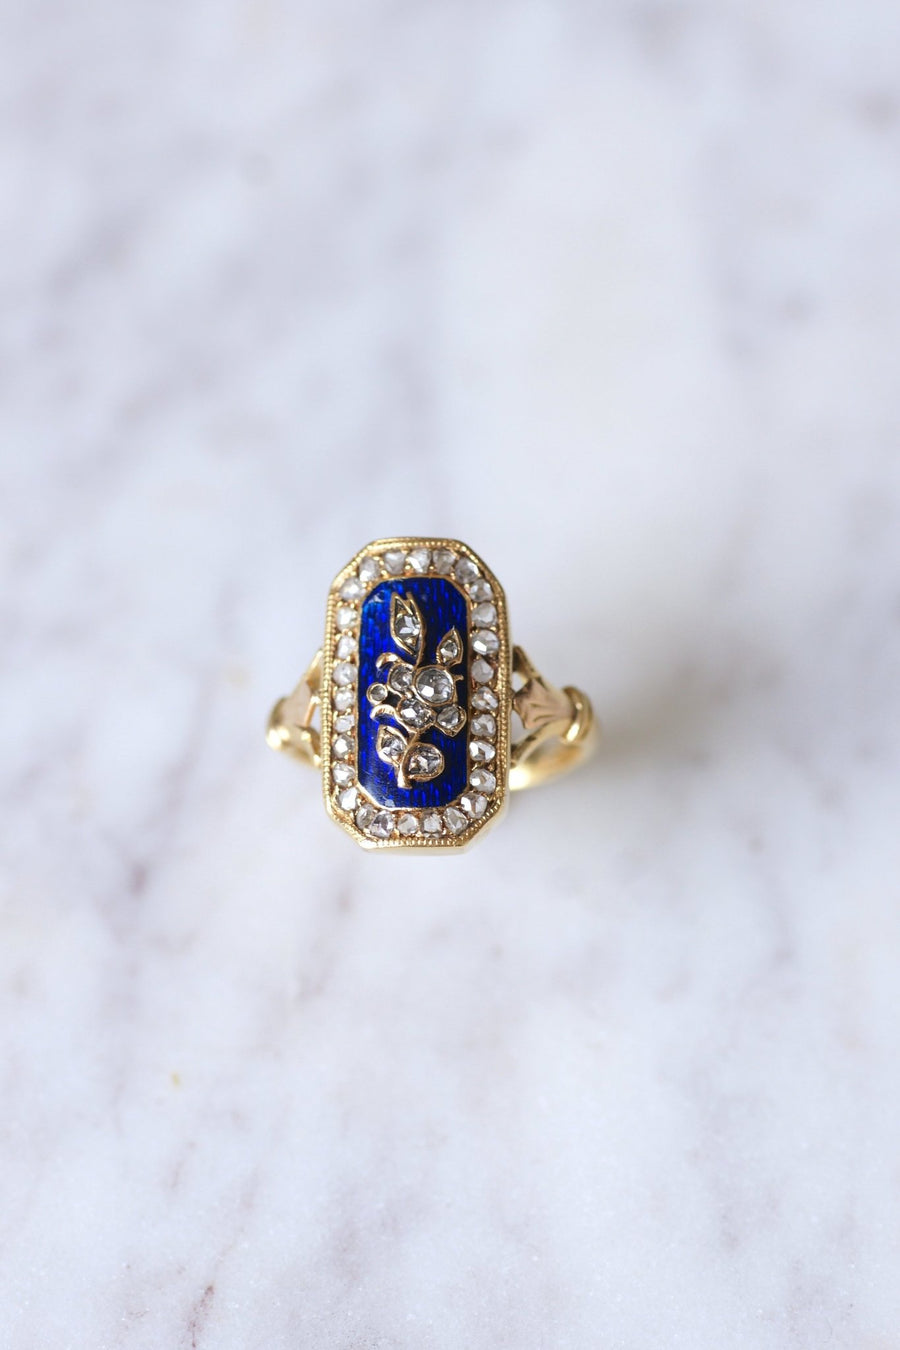 Antique gold and flower ring inlaid with diamonds on blue enamel - Galerie Pénélope